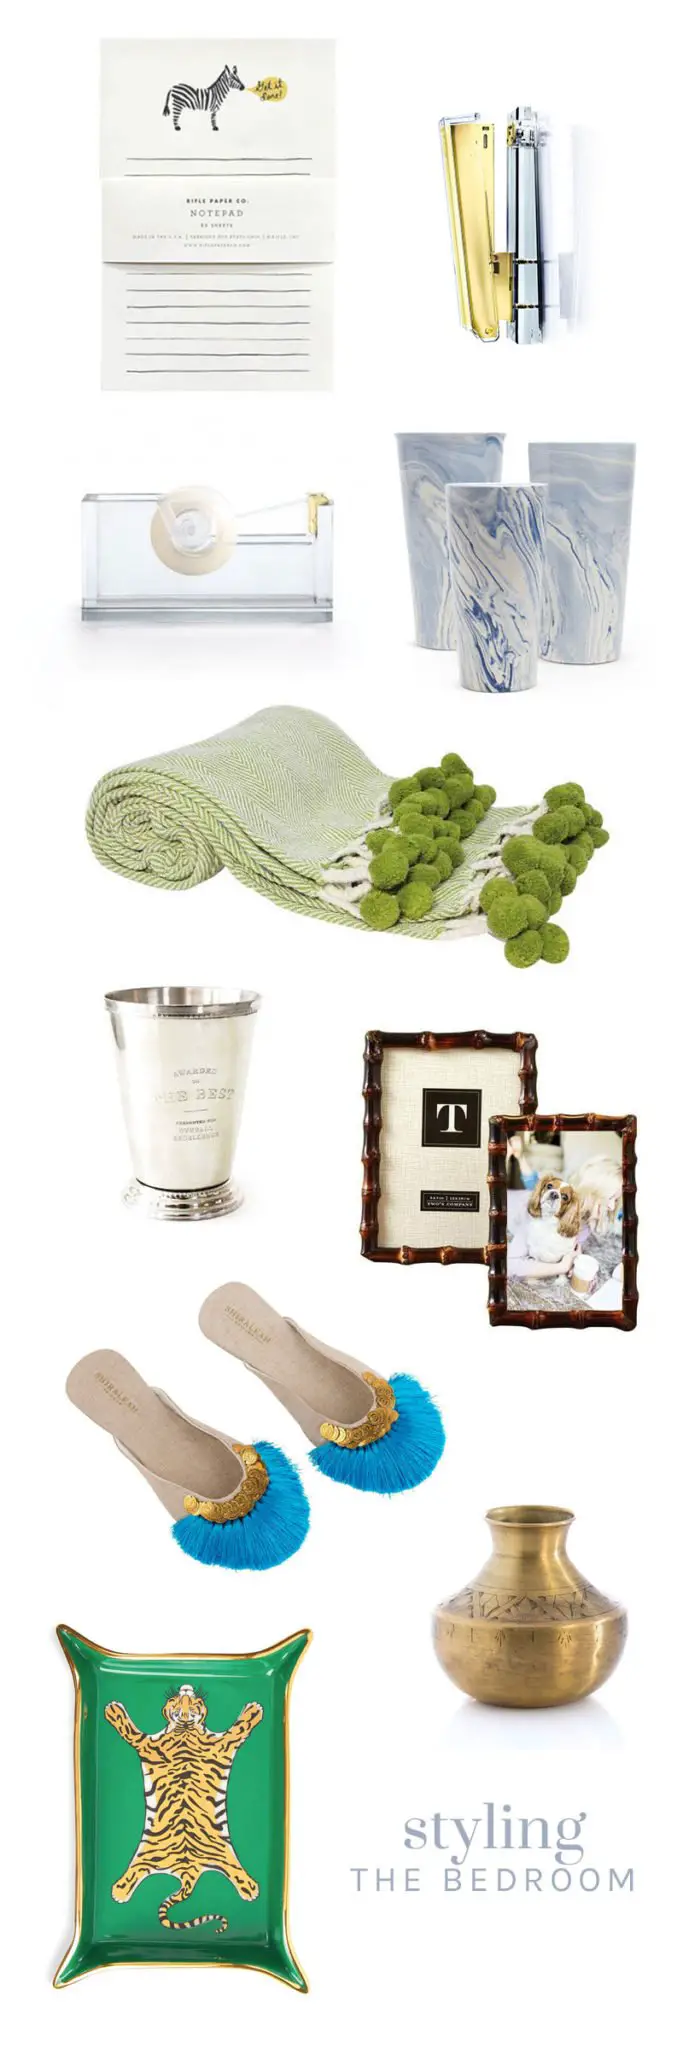 Home decor and accessories from Waiting on Martha on Thou Swell @thouswellblog